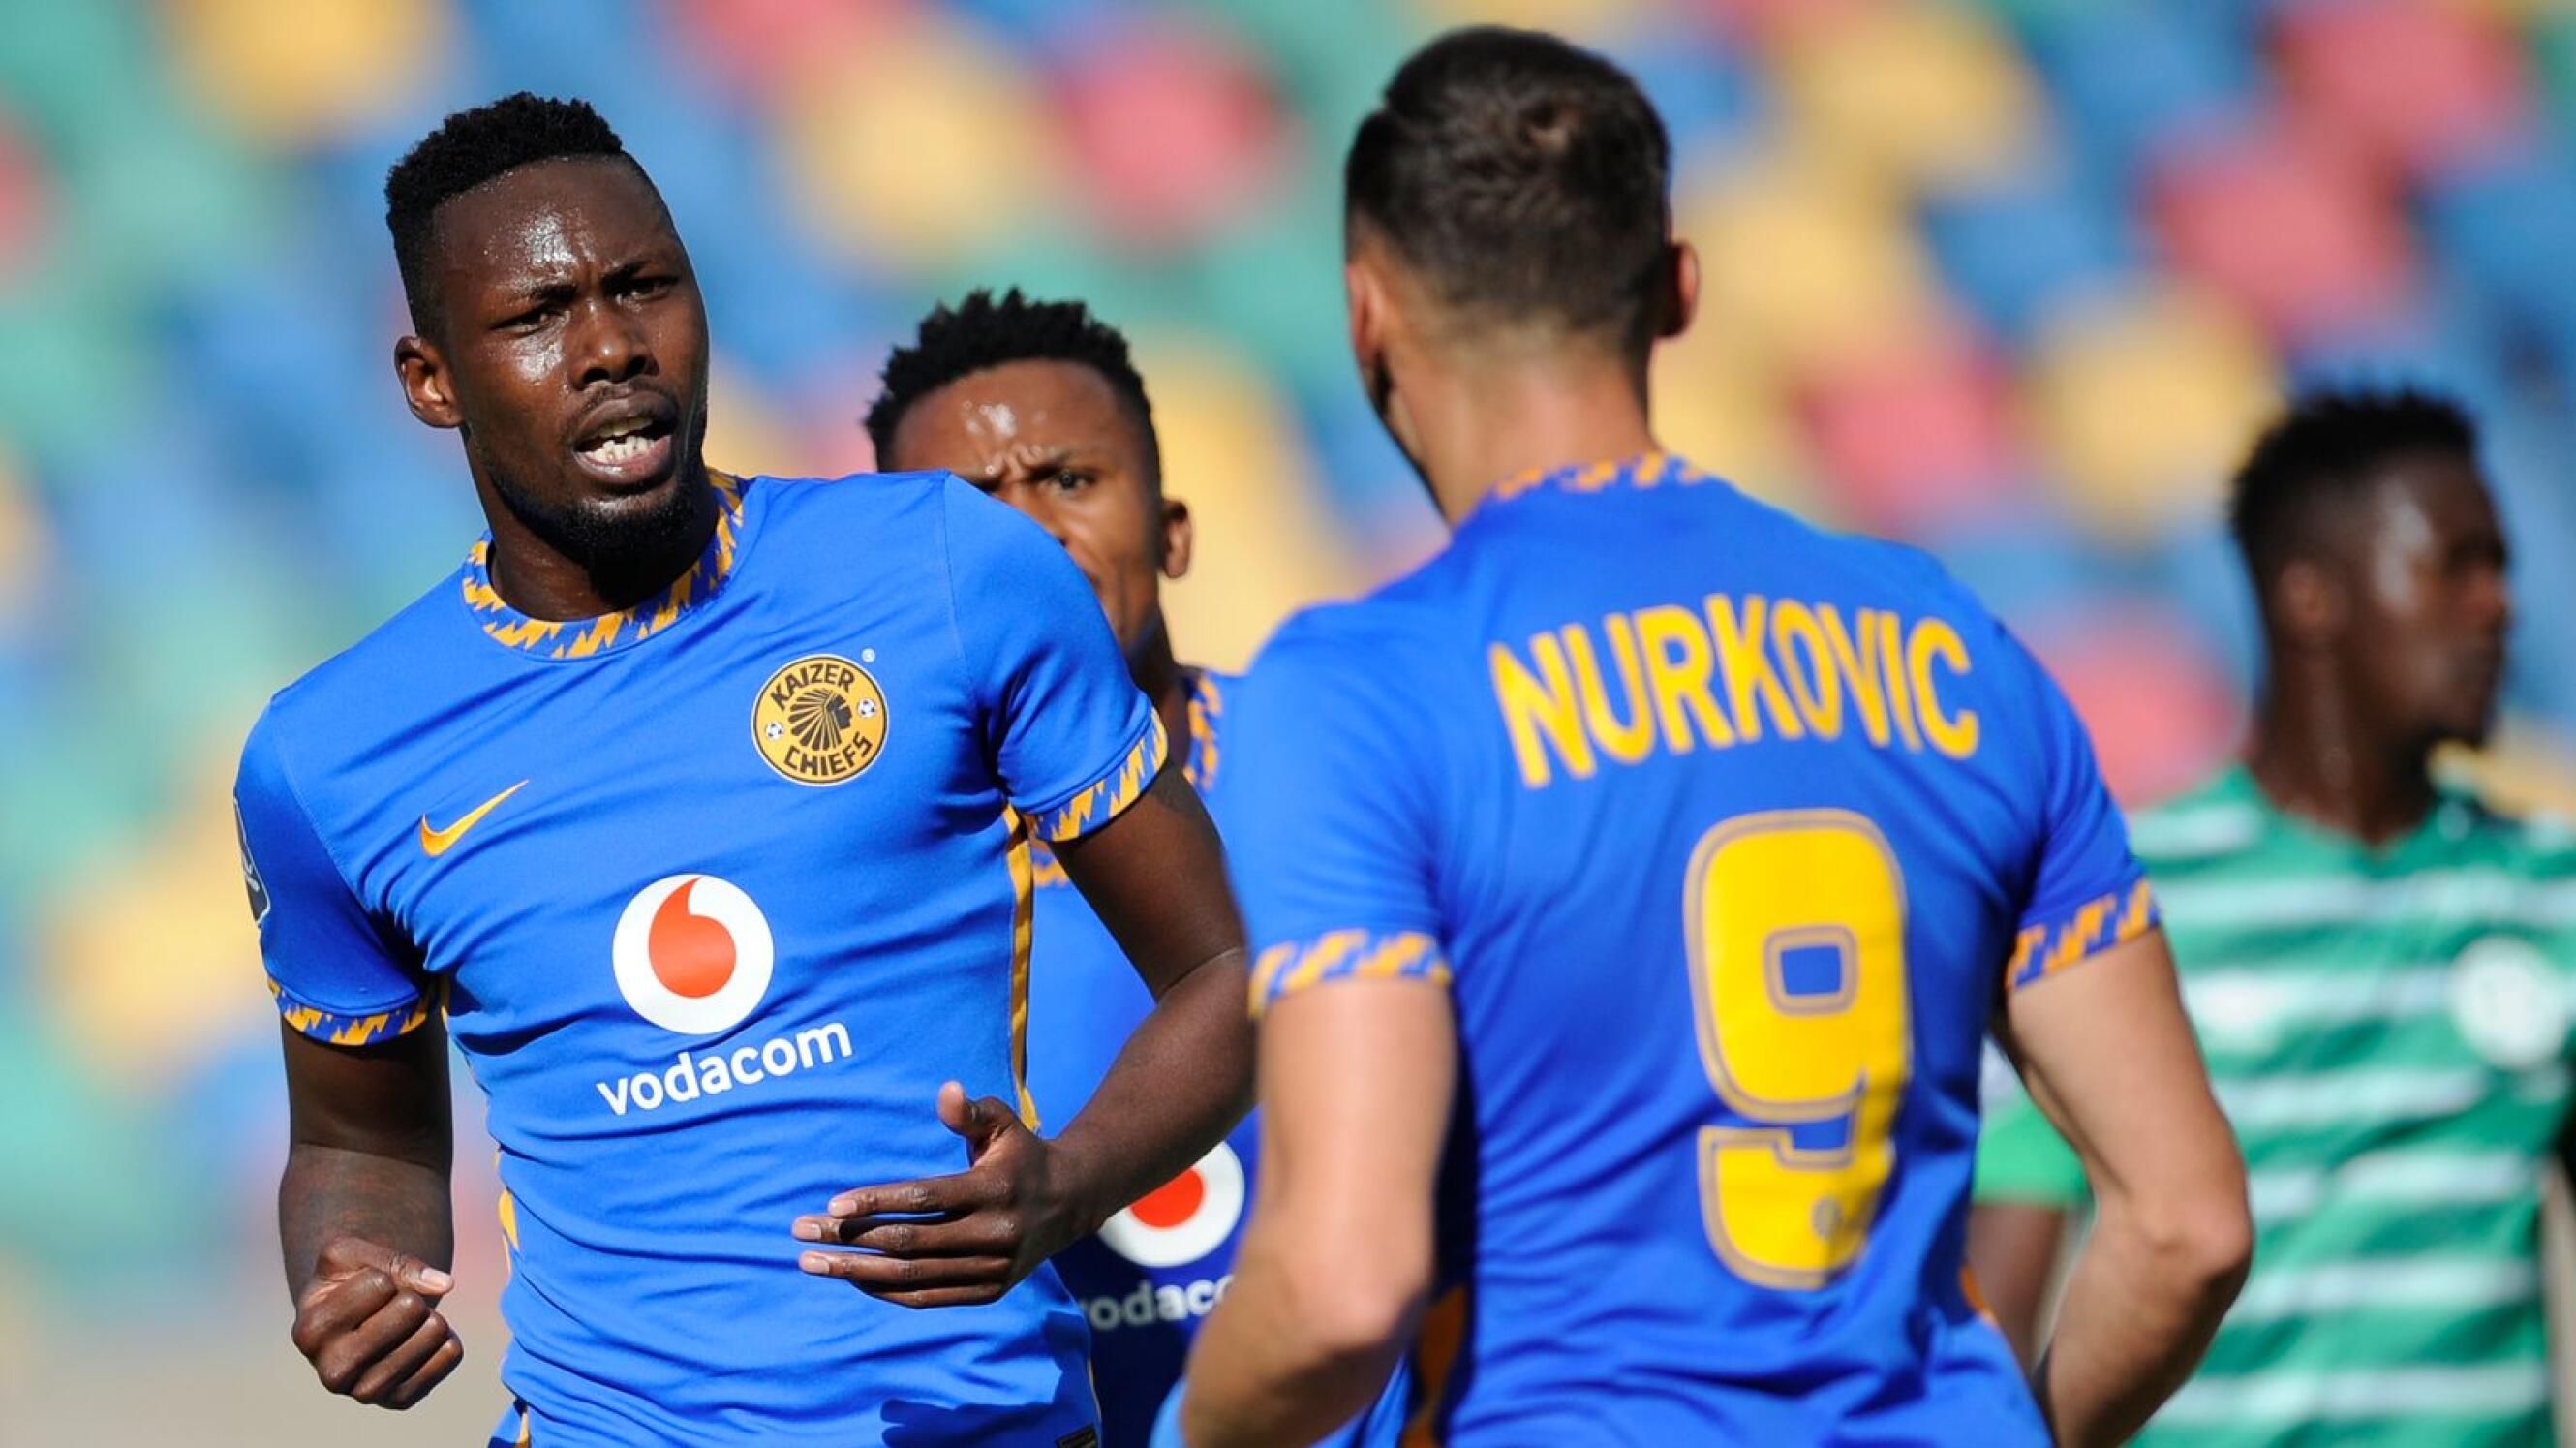 Erick Mathoho and Samir Nurkociv will be key for Kaizer Chiefs when they take on Al Ahly in the Caf Champions League final on Saturday